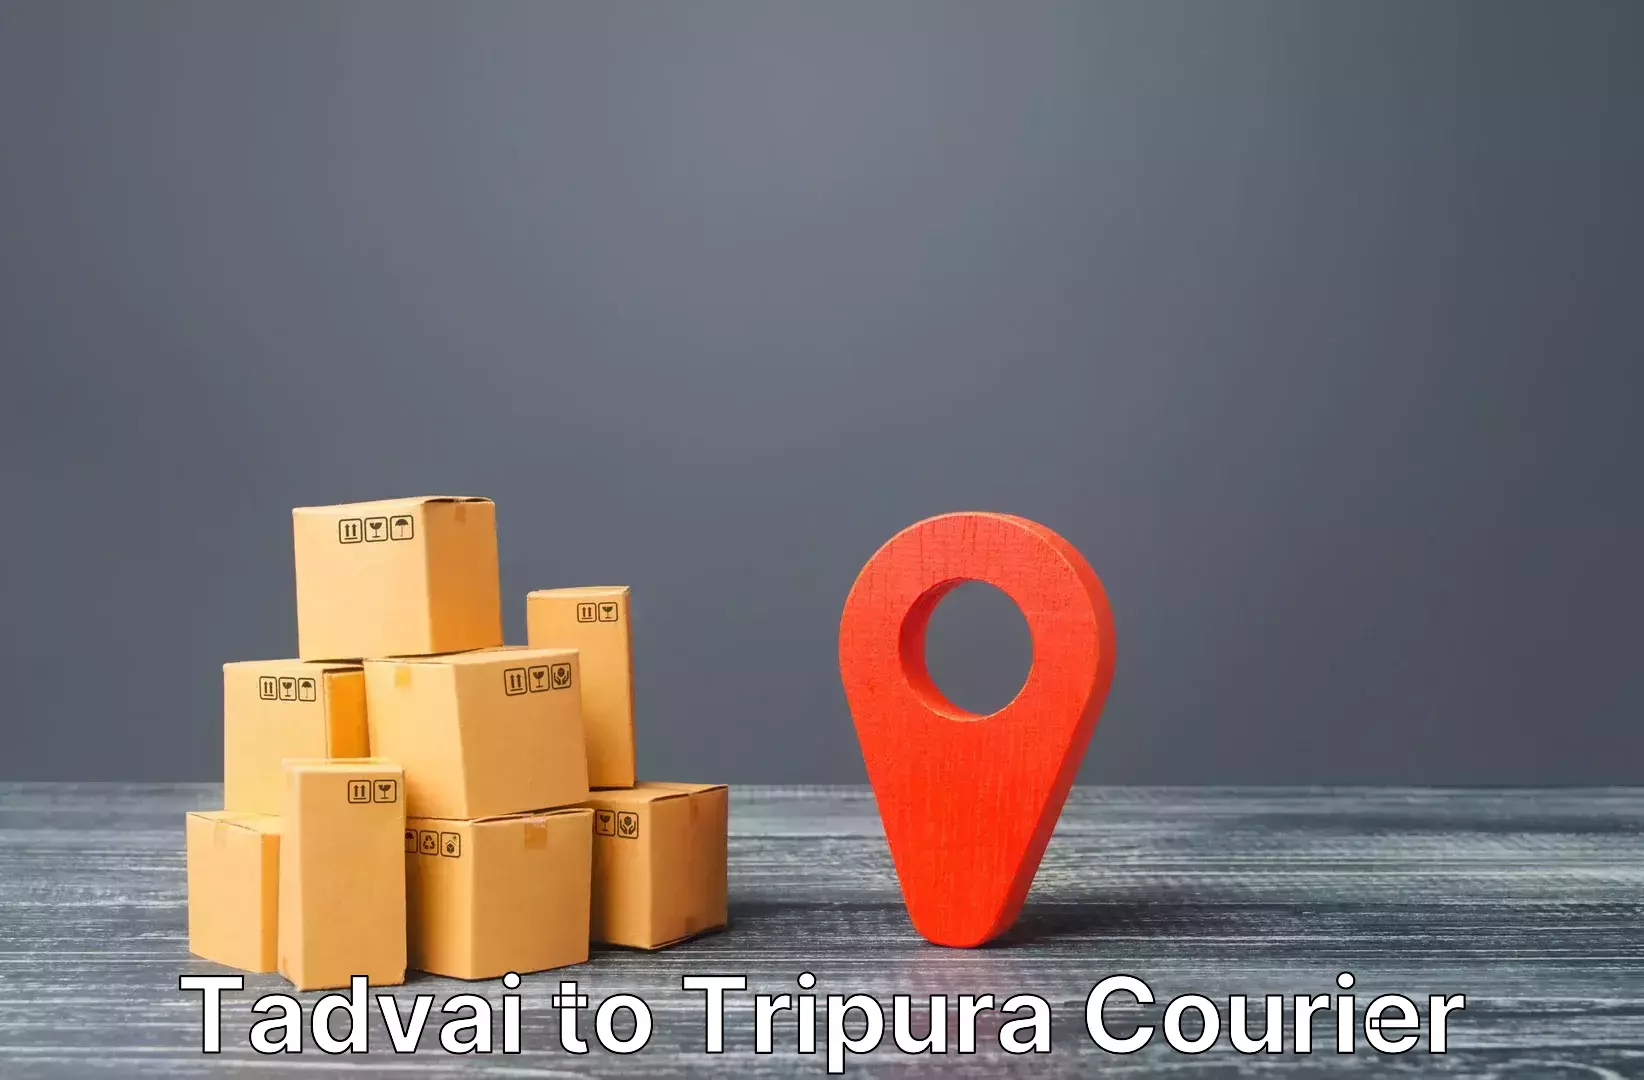 Personal effects shipping in Tadvai to Amarpur